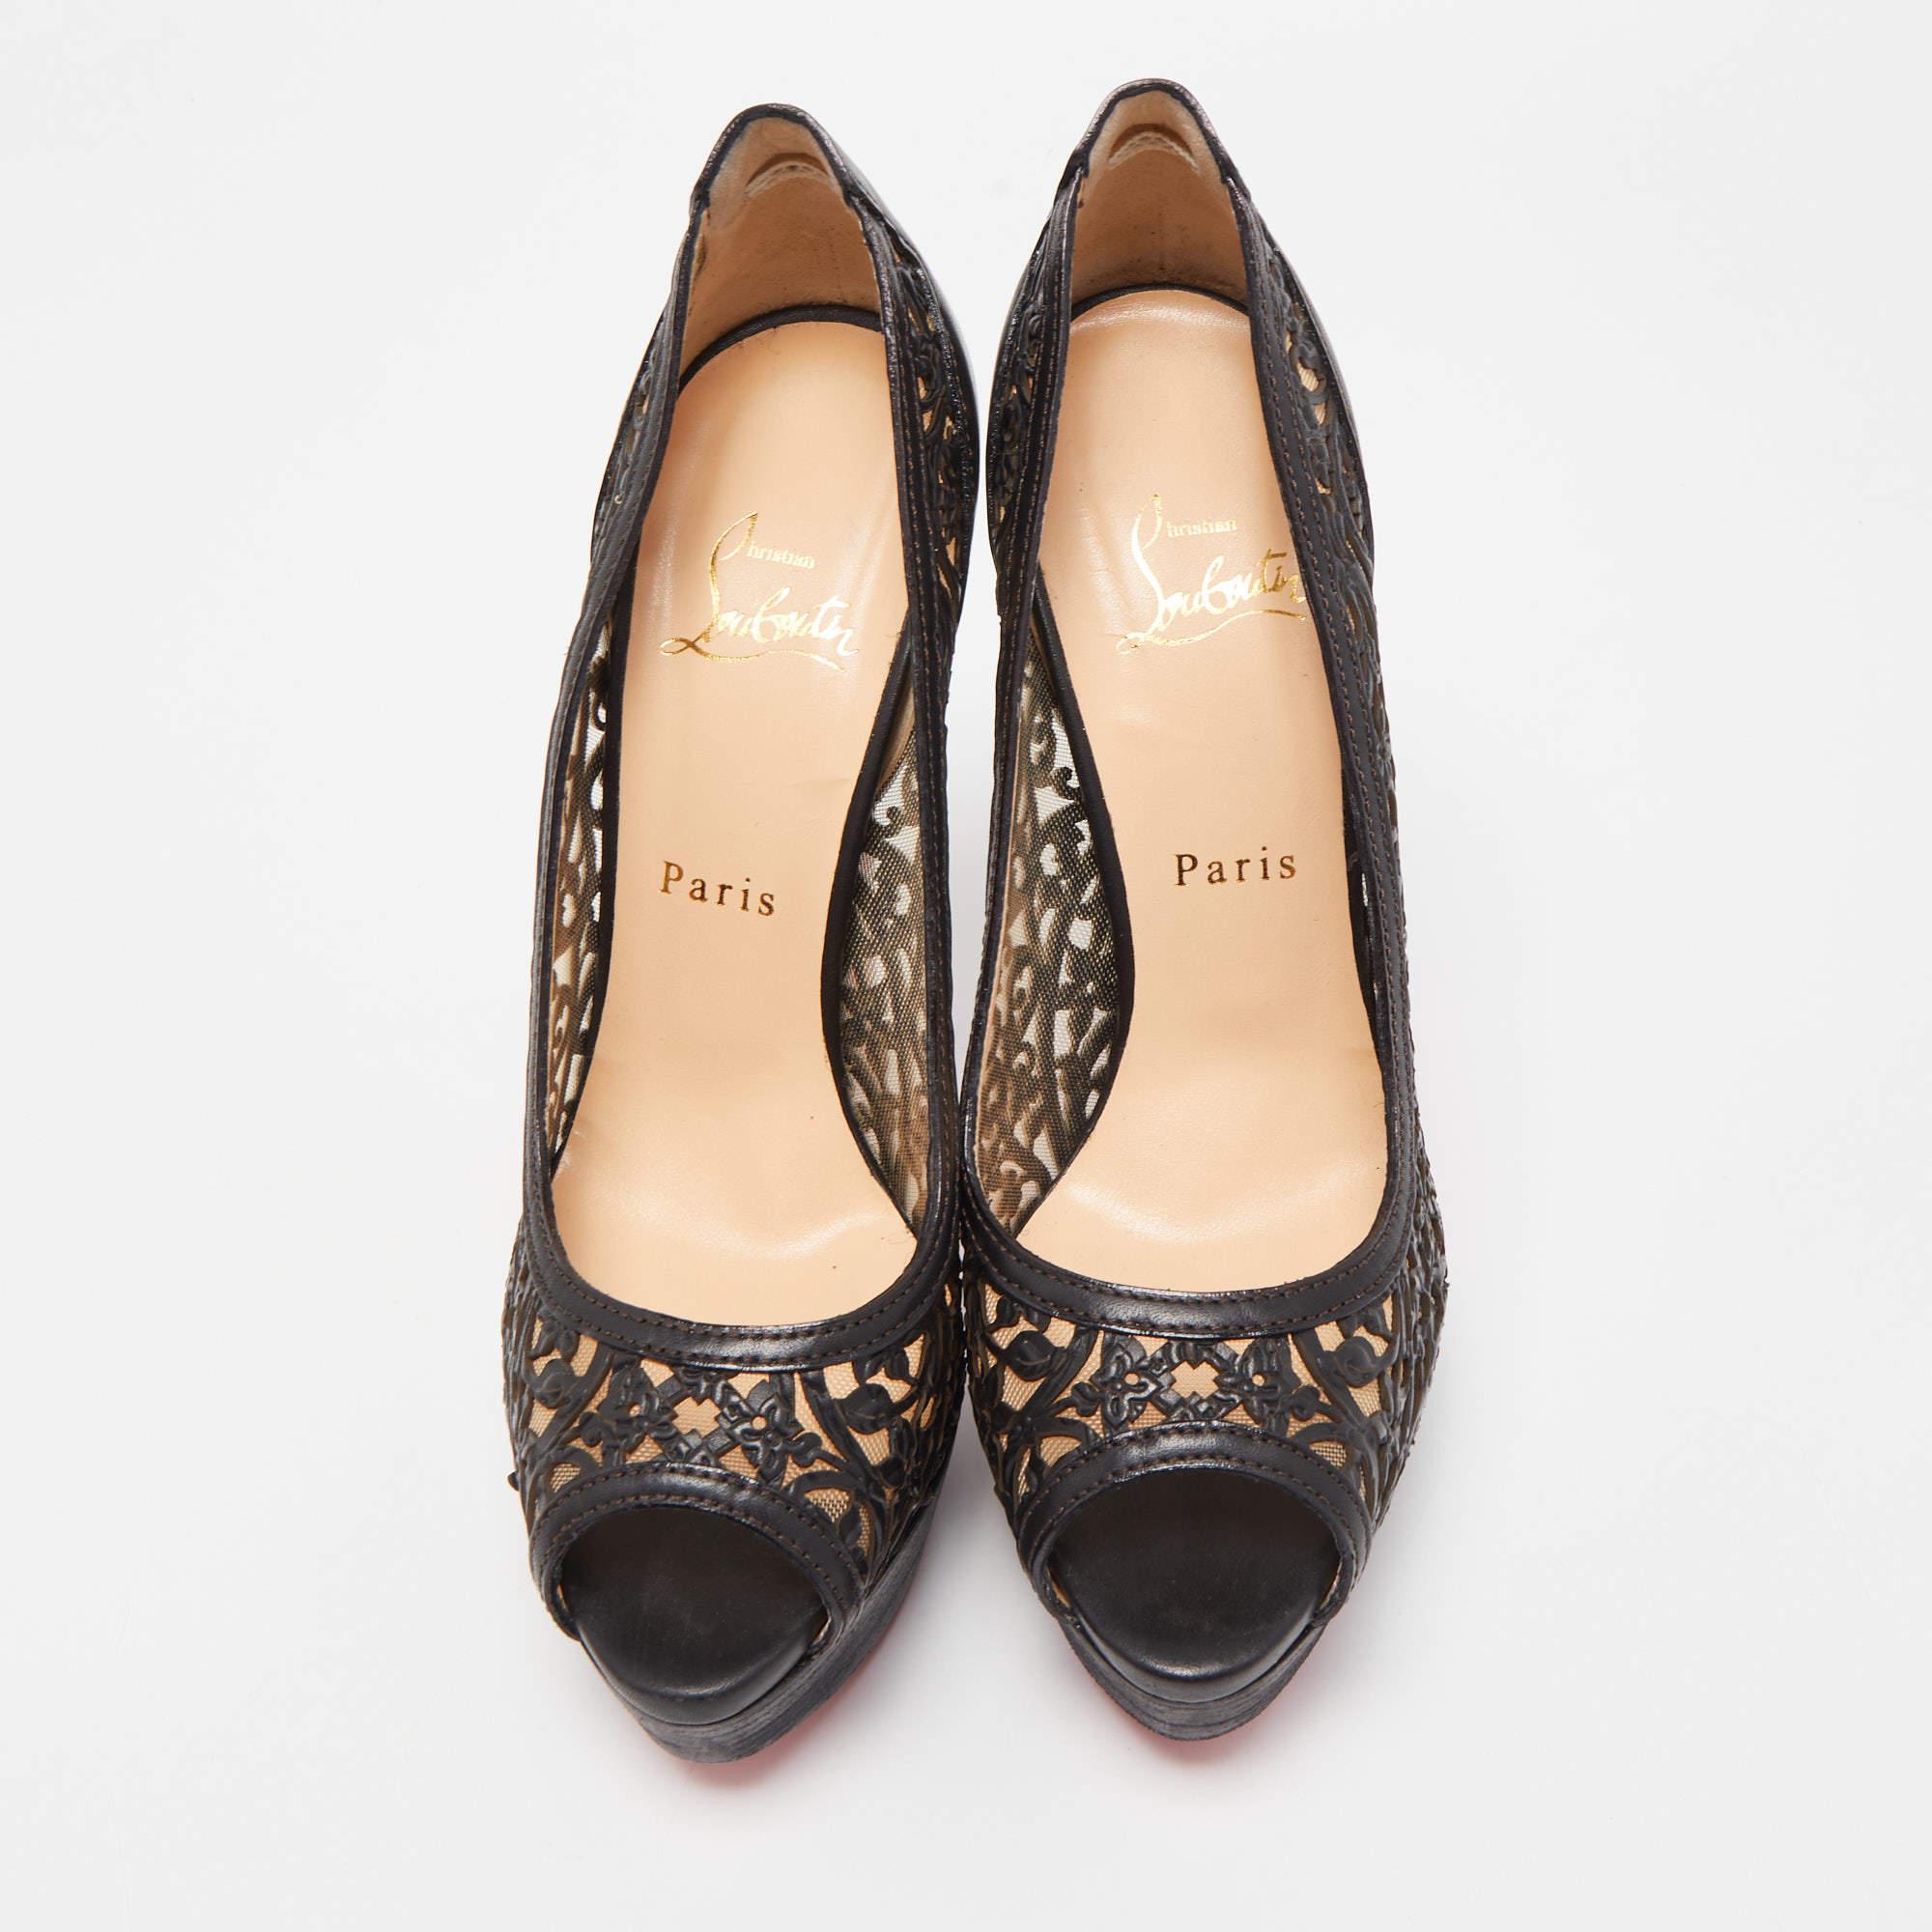 Evita Pampas pumps are elegant and sophisticated women's footwear that exudes timeless style. Crafted from high-quality materials, these pumps feature a peep toe, a slender heel, and a luxurious leather upper. With their sleek design and comfortable